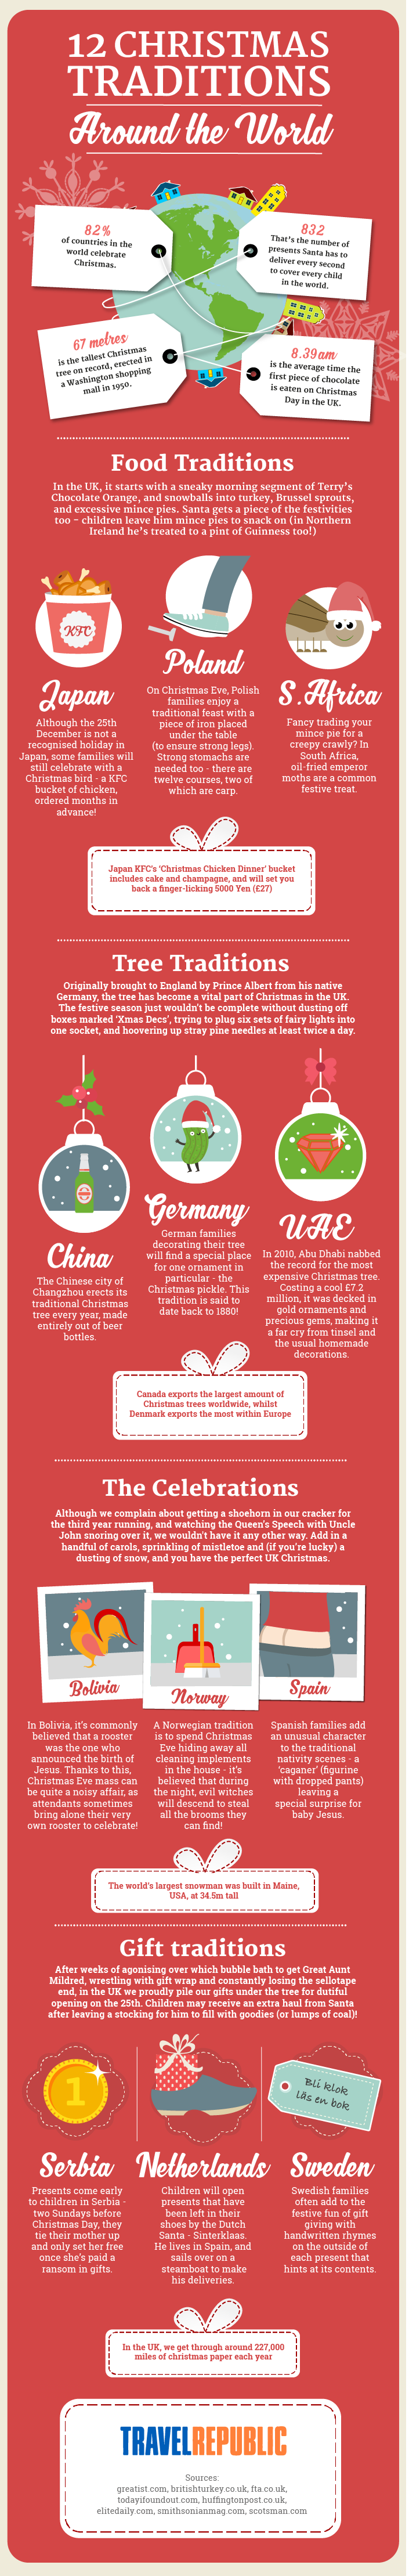 12 Christmas Traditions From Around The World by Travel Republic